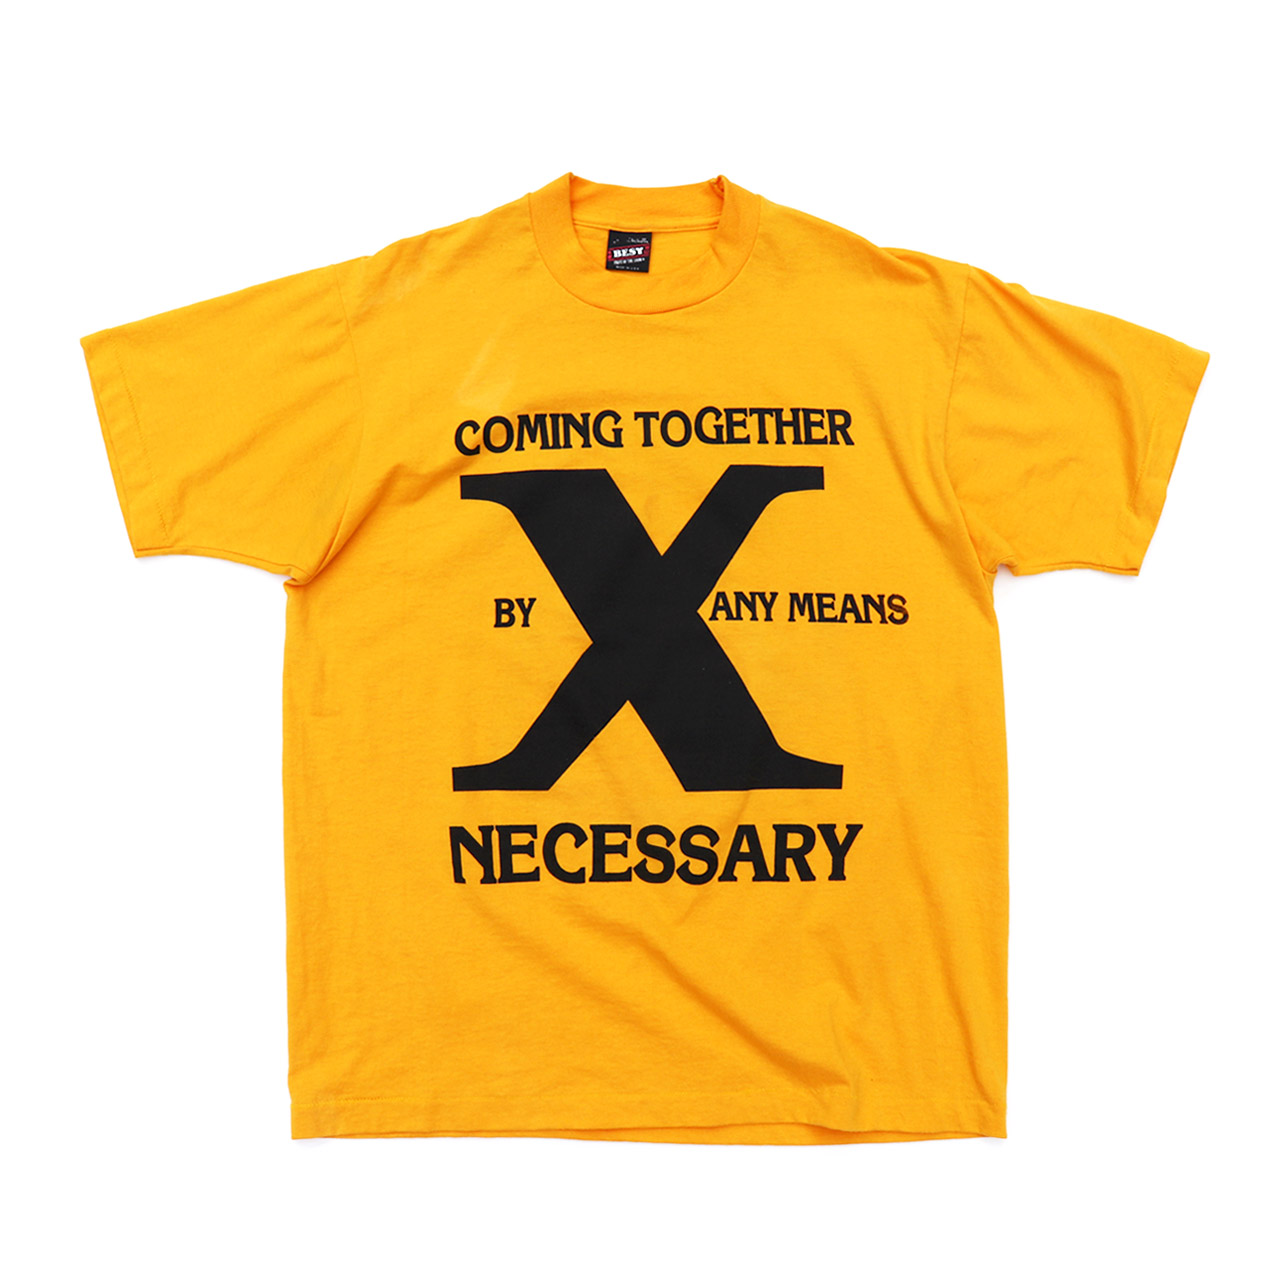 POST JUNK / 90's MALCOLM X ”BY ANY MEANS NECESSARY” プリントT